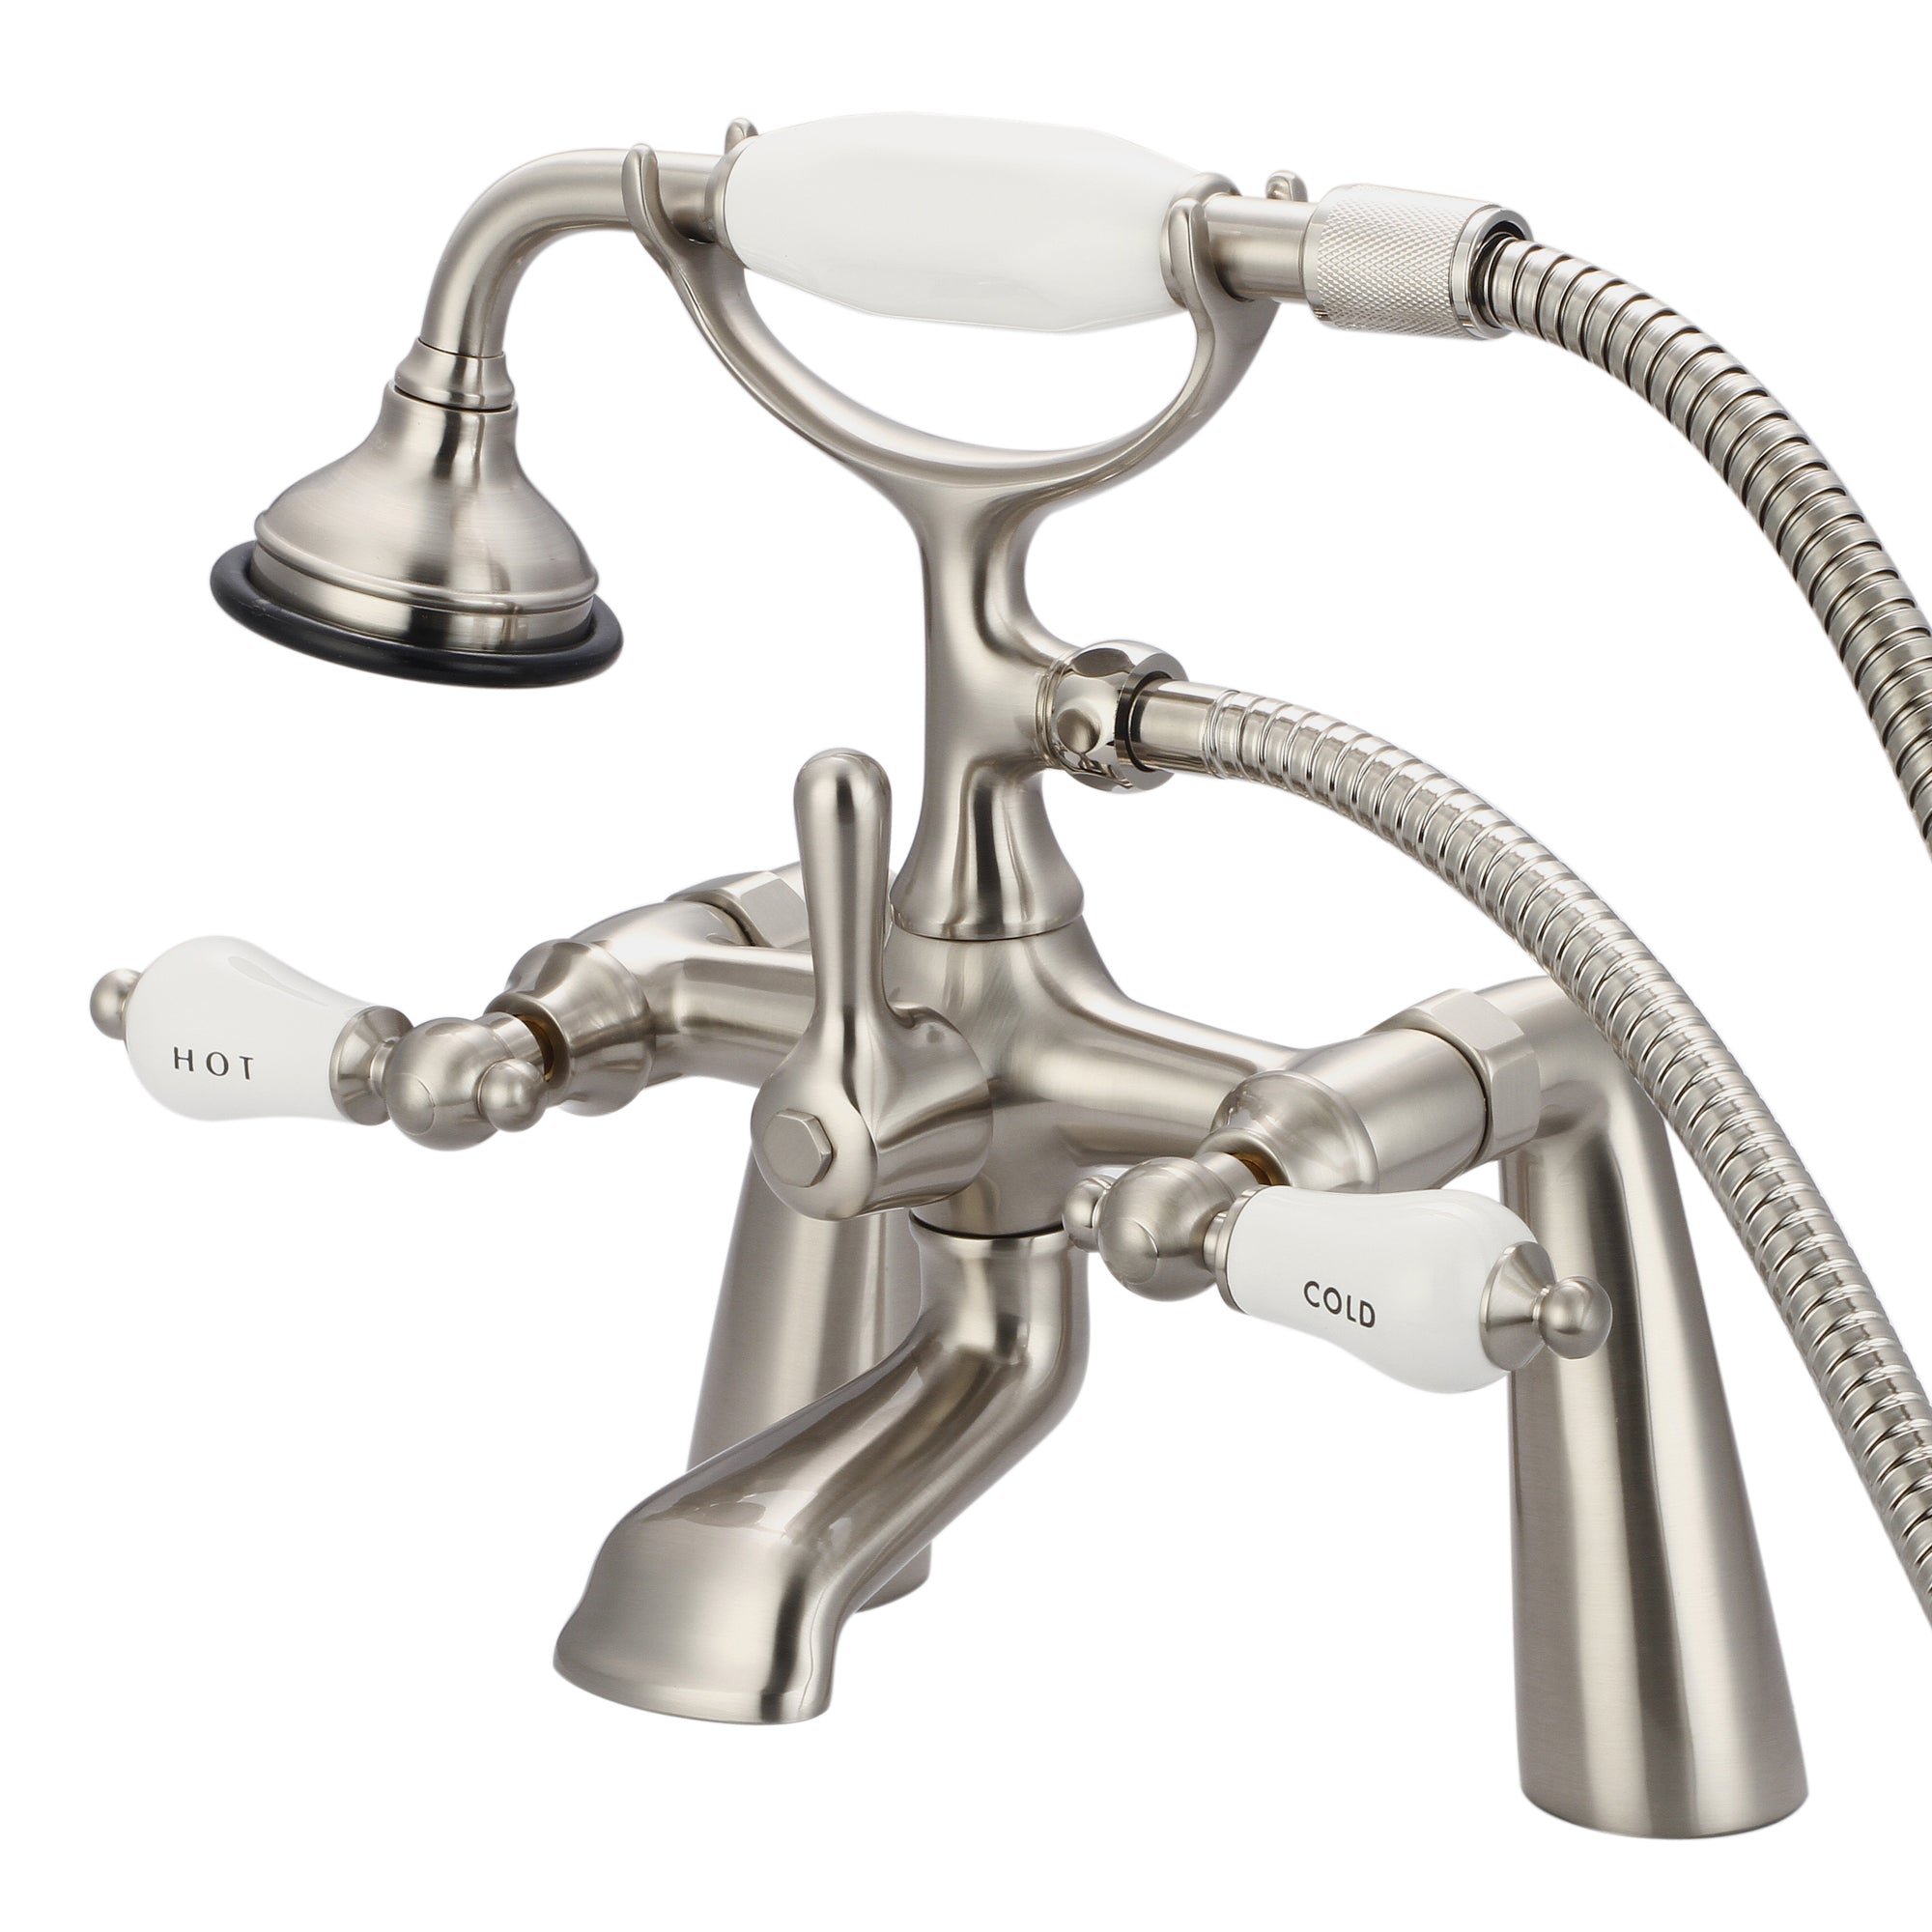 Water Creation | Vintage Classic 7 Inch Spread Deck Mount Tub Faucet With Handheld Shower in Brushed Nickel Finish With Porcelain Lever Handles, Hot And Cold Labels Included | F6-0003-02-CL